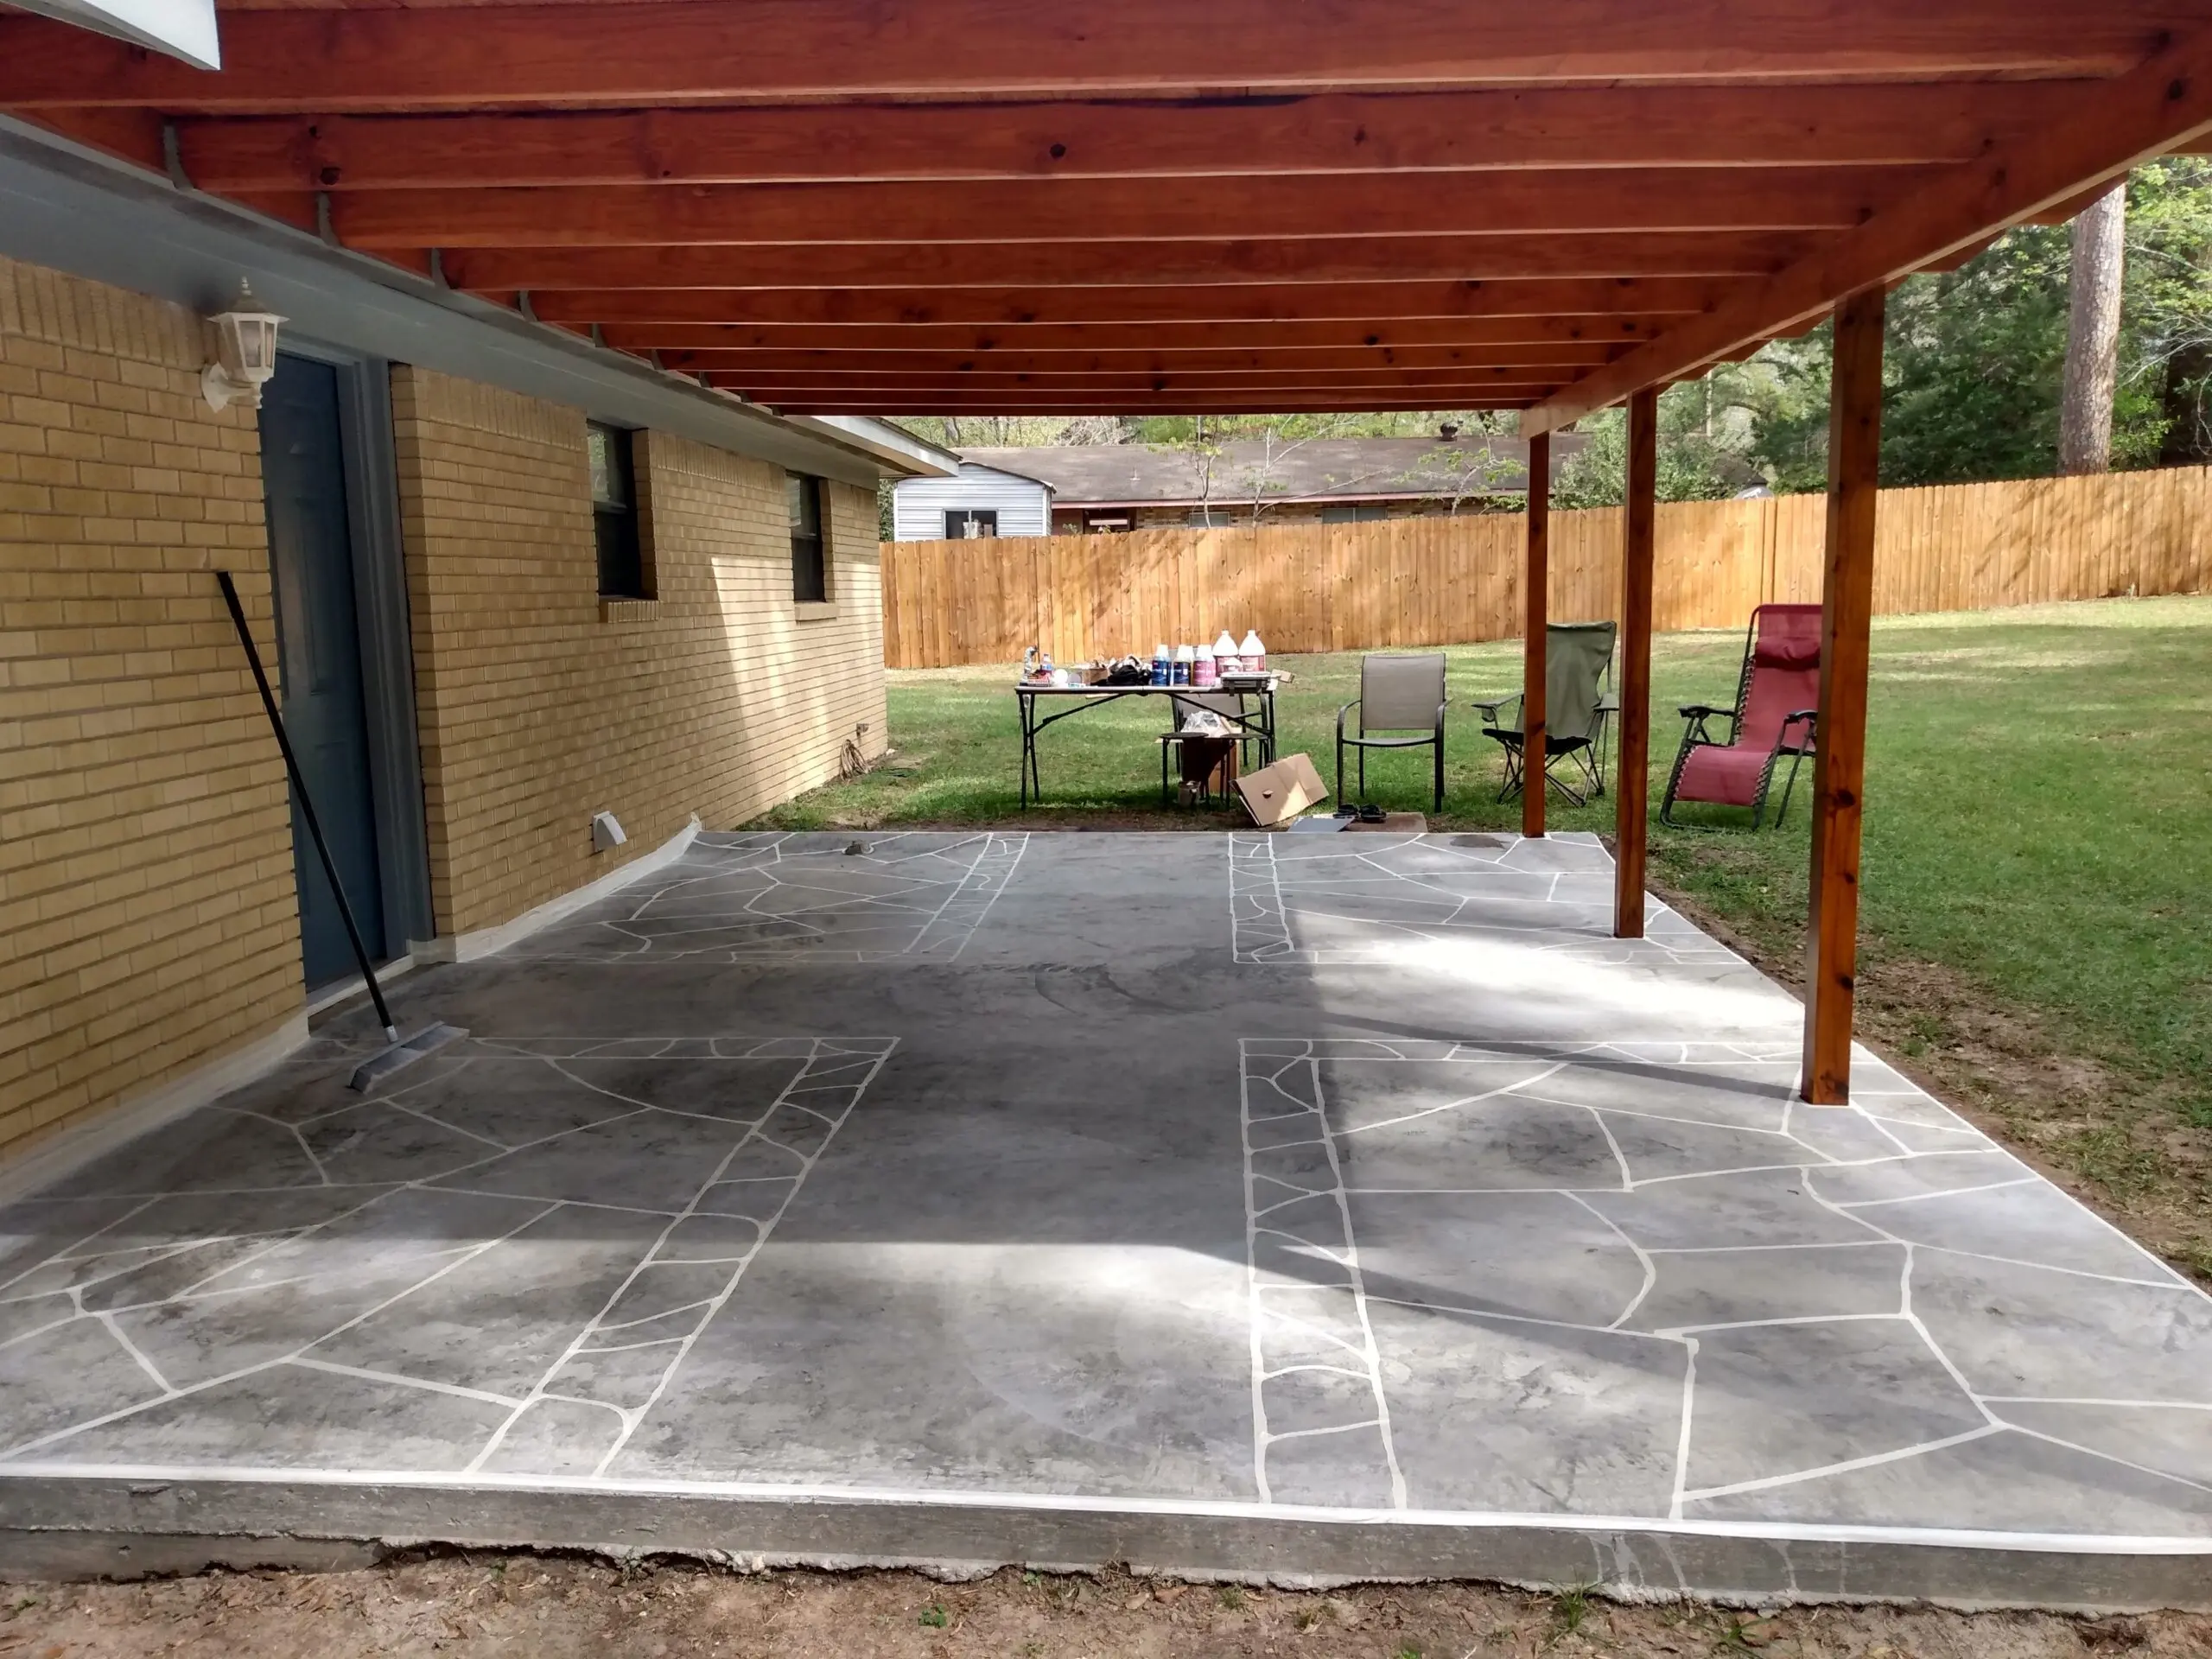 Image showing a porch with sections taped off, preparing for the application of the faux flagstone design using acid stains